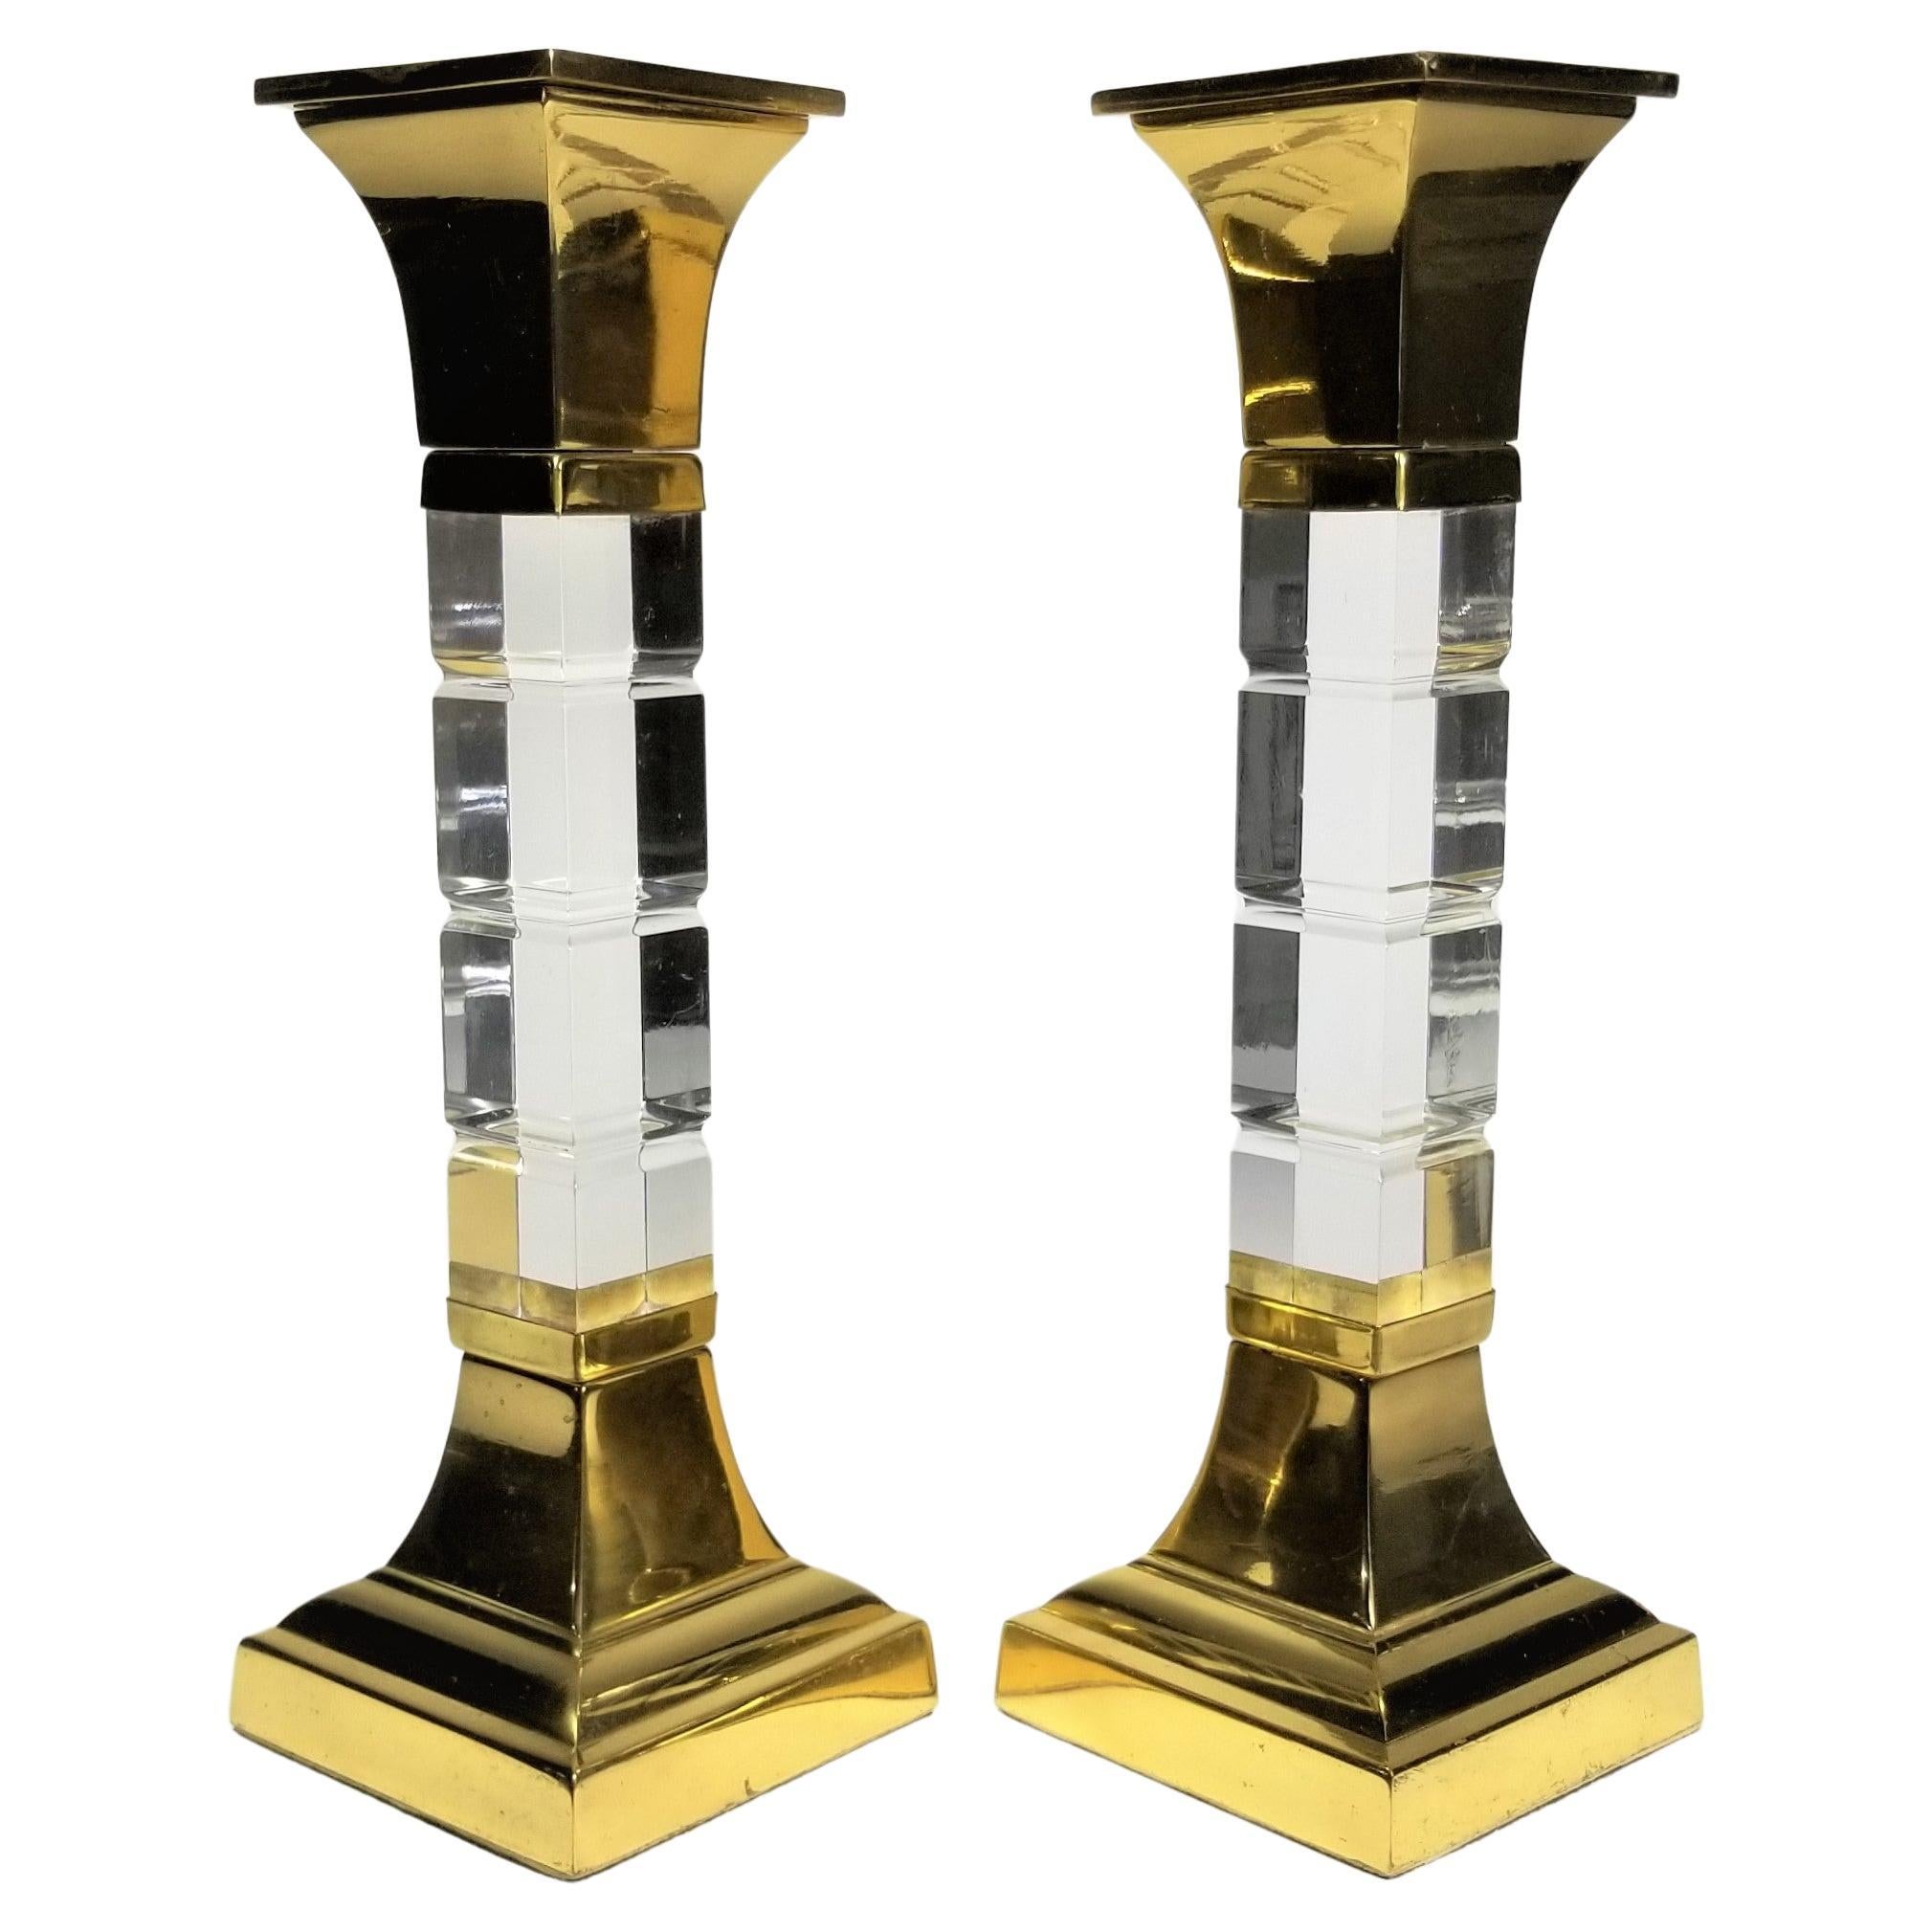 Lucite and Brass Large Candle Holders Candlesticks 1970s Mid. Century 